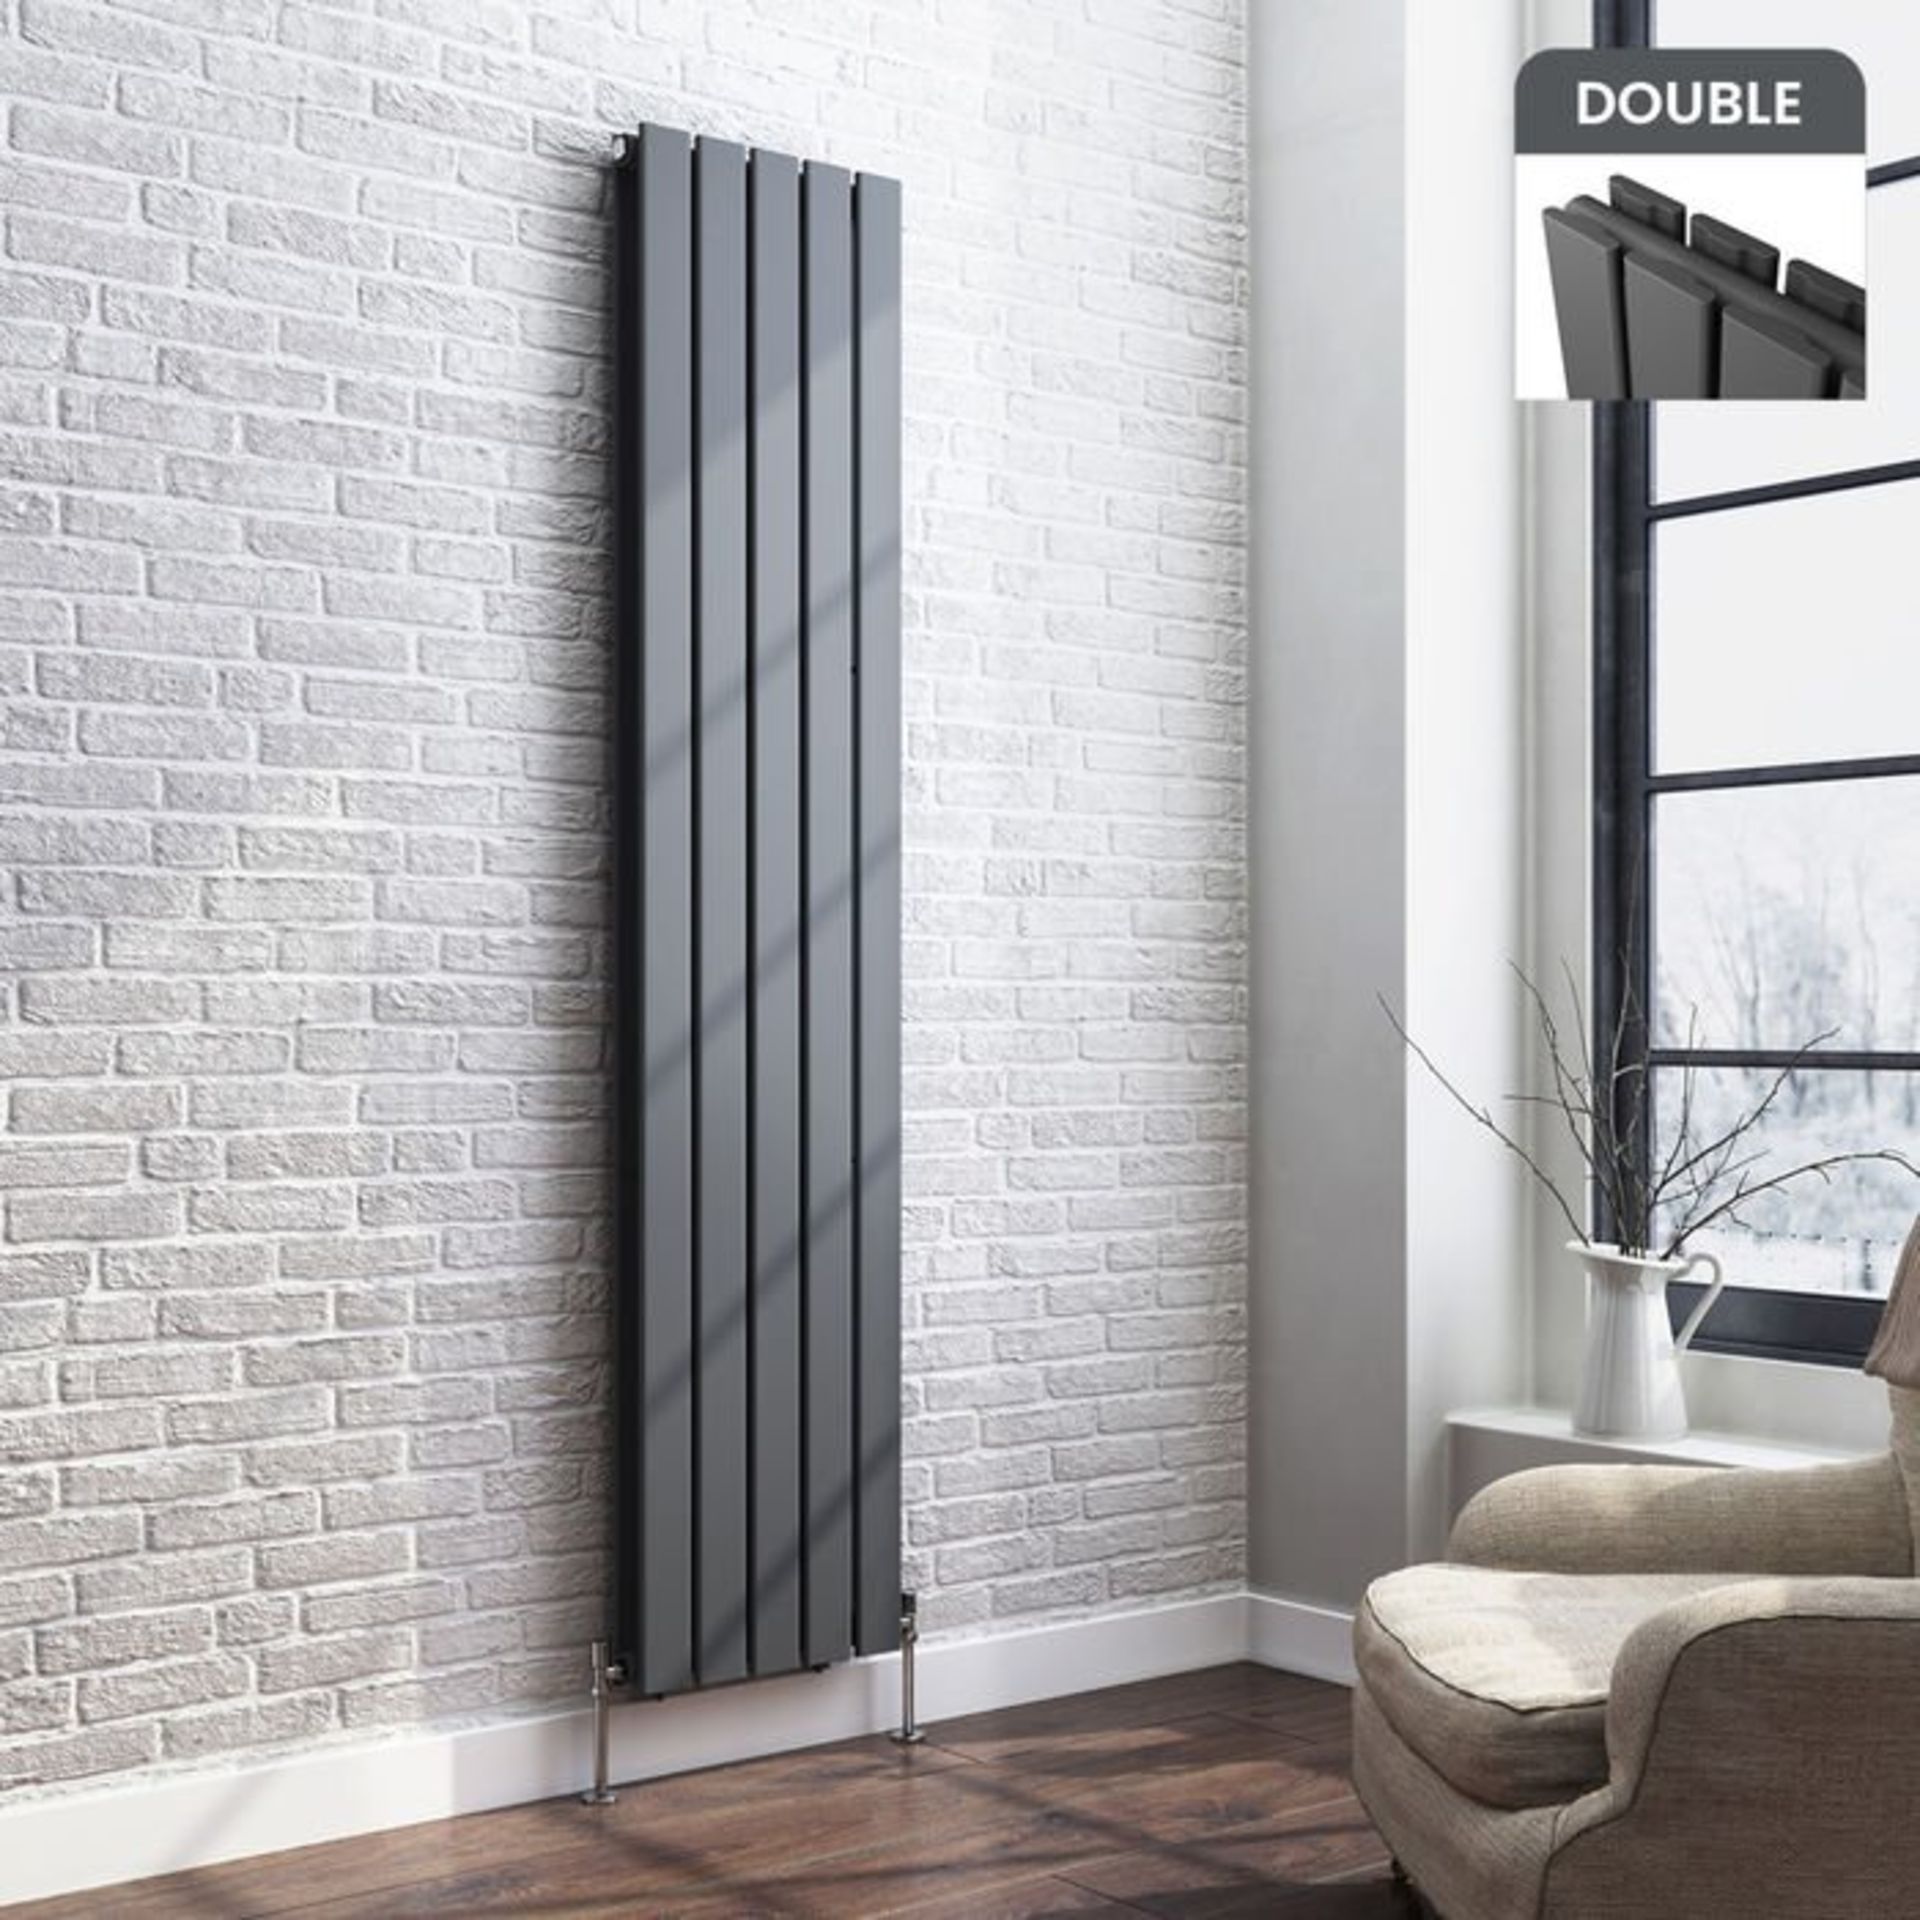 (L141) 1800x376mm Anthracite Double Flat Panel Vertical Radiator. RRP £449.99. Made with low